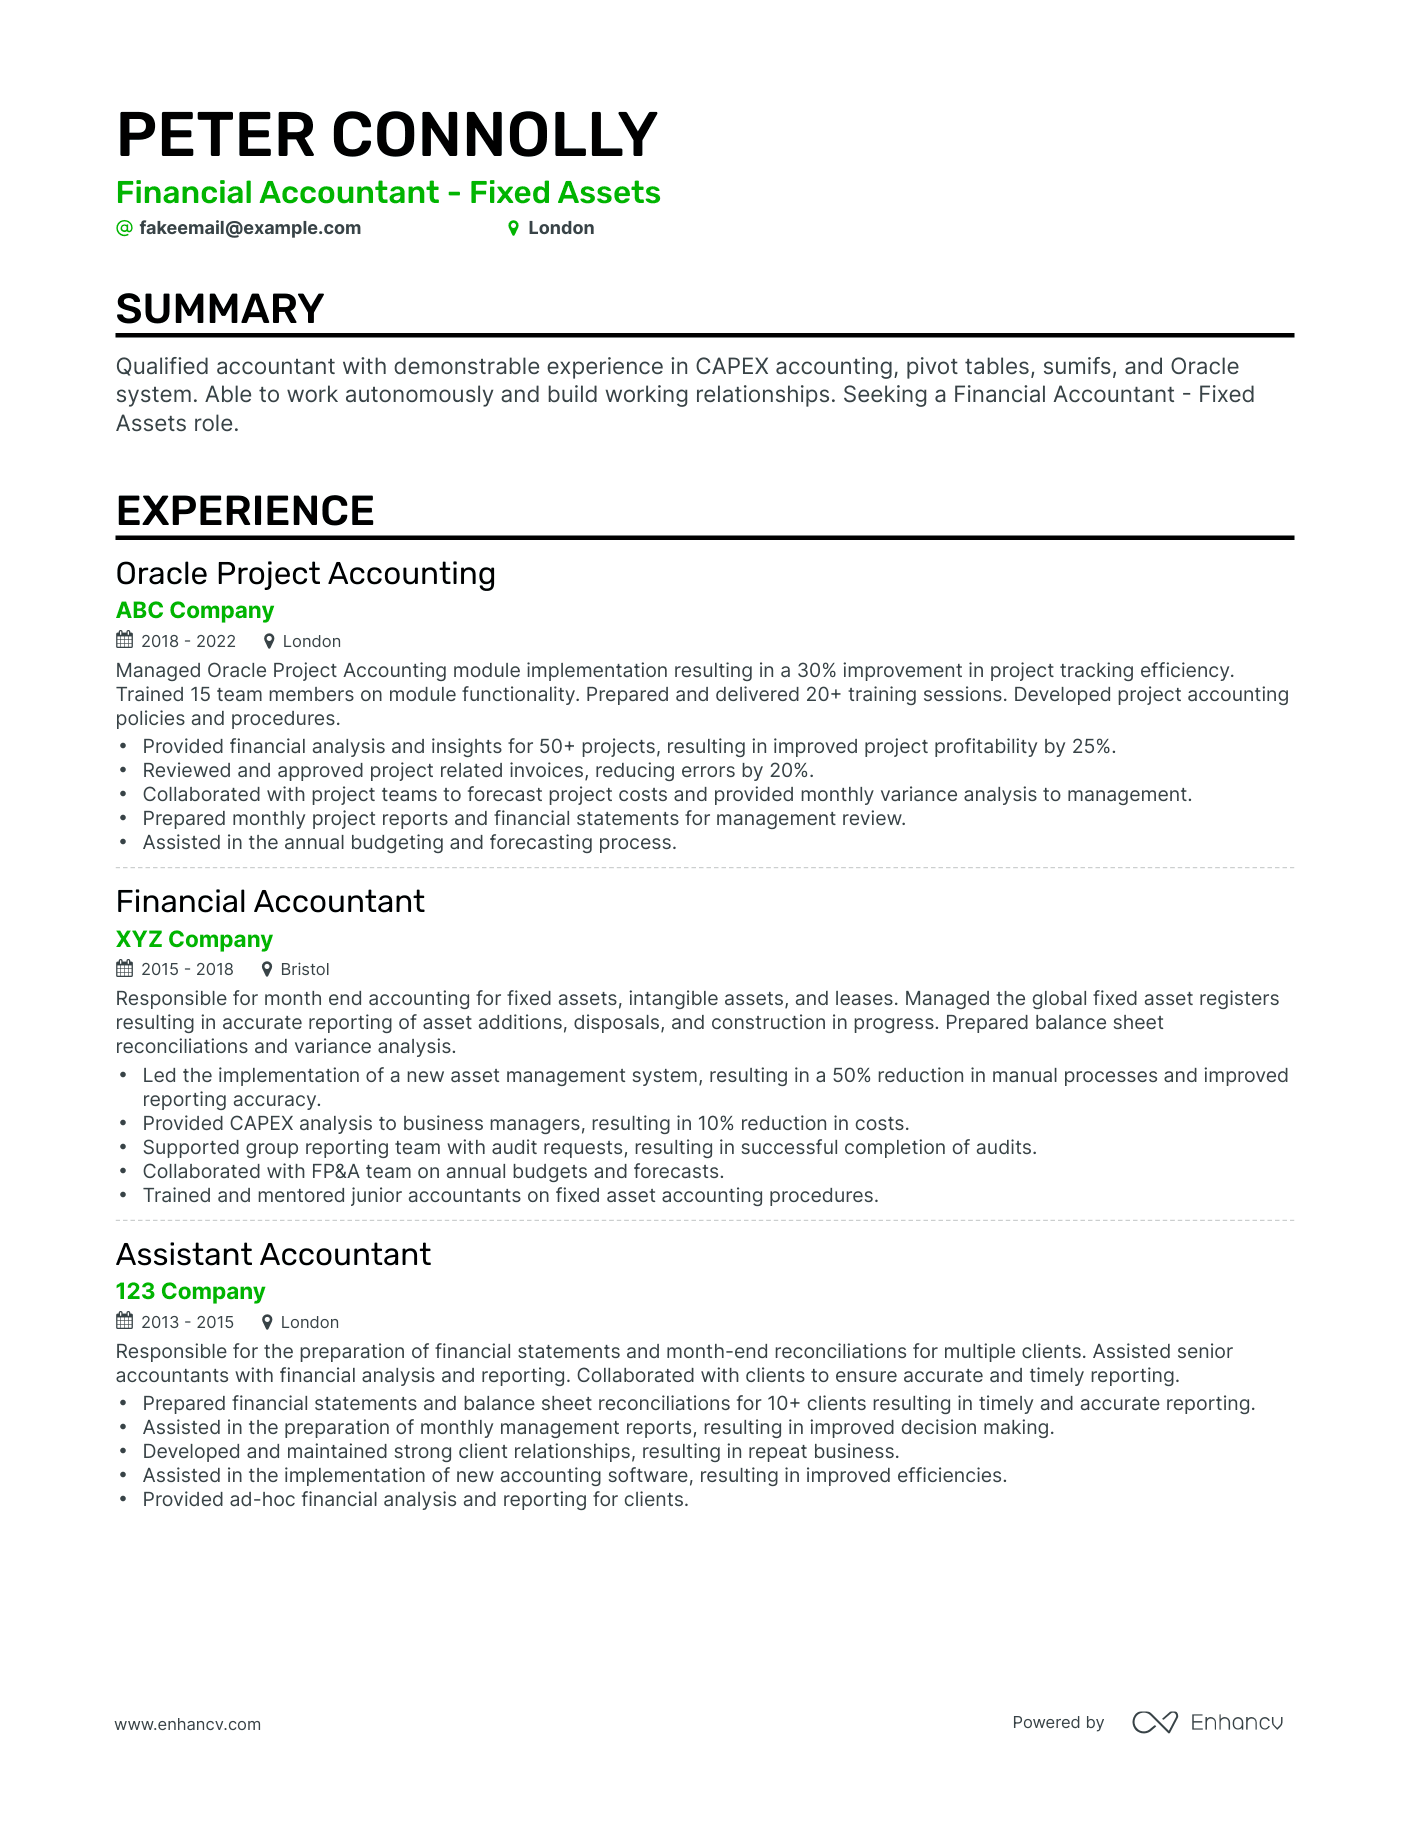 Classic Oracle Project Accounting Resume Template